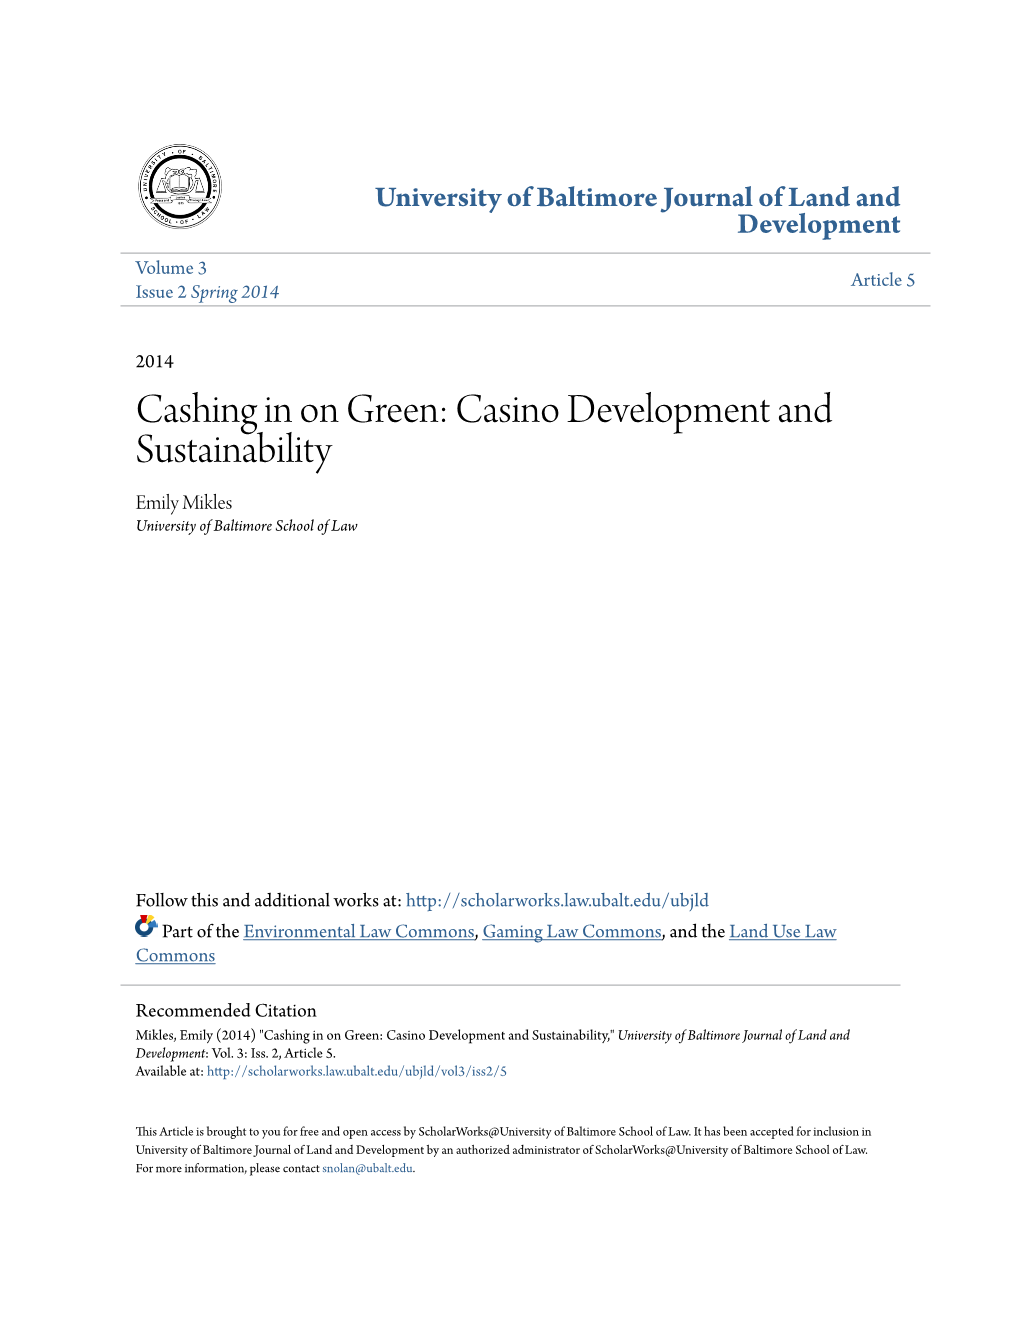 Cashing in on Green: Casino Development and Sustainability Emily Mikles University of Baltimore School of Law